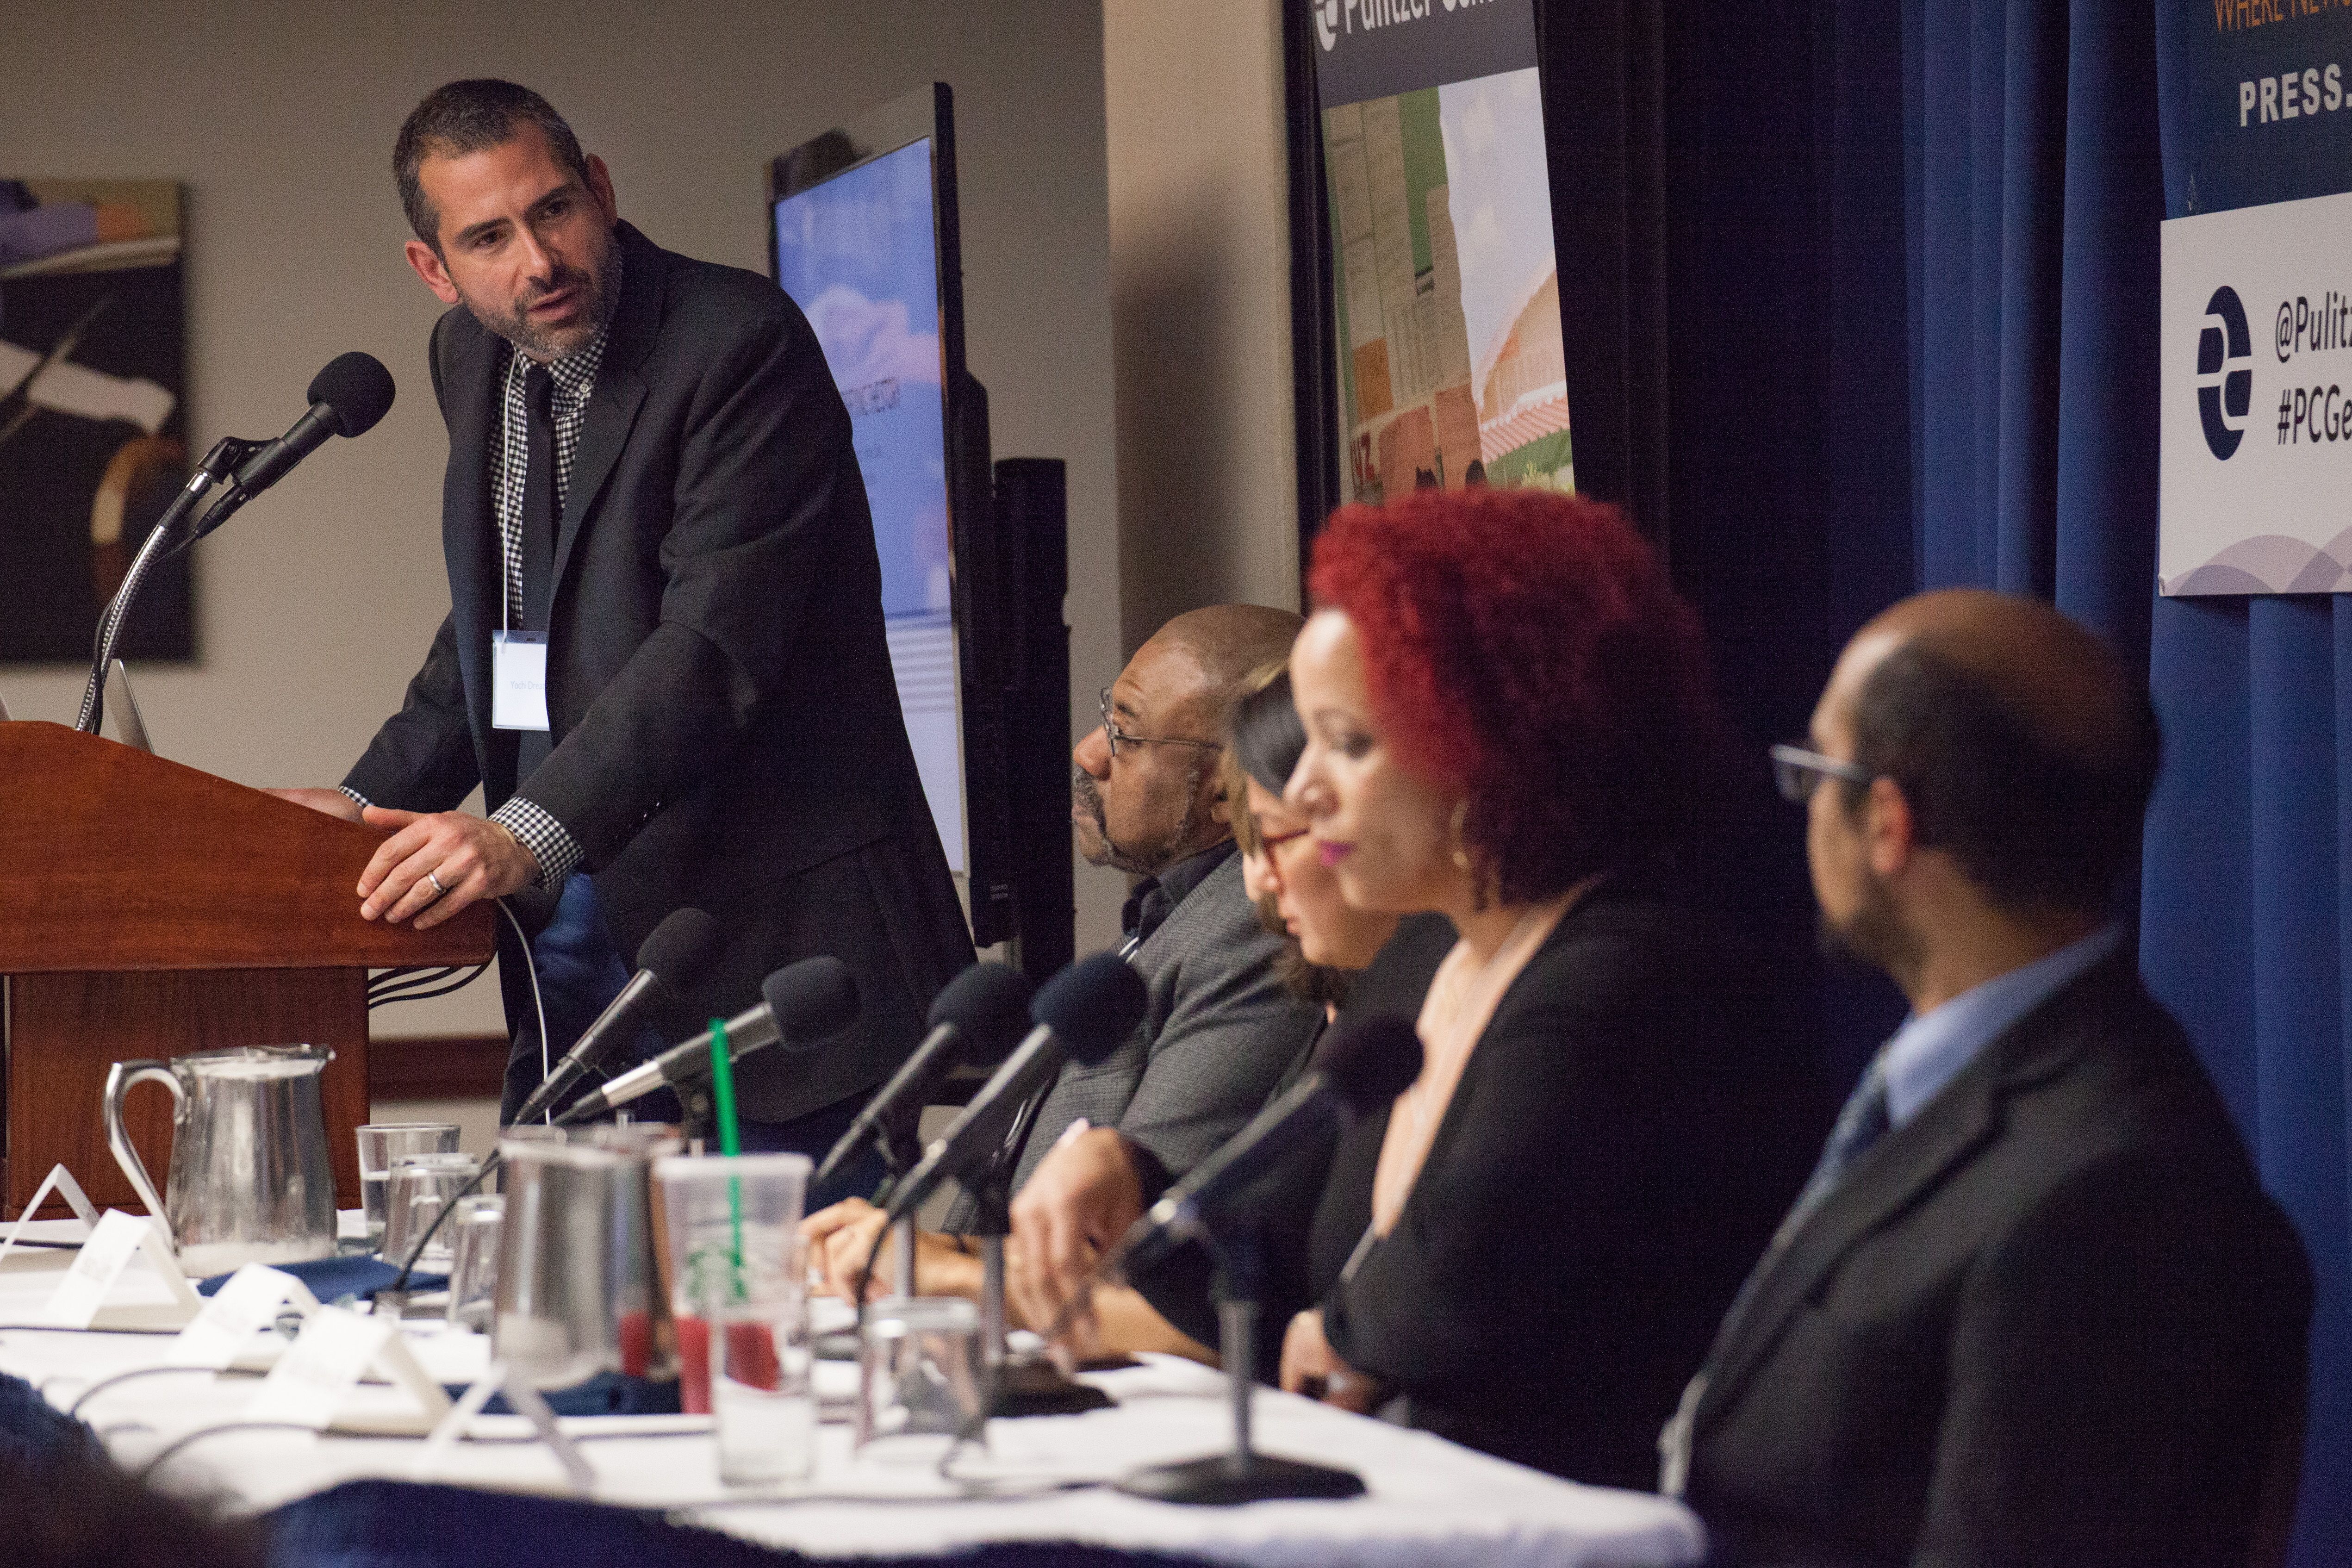 Moderator Yochi Dreazen addresses speakers on the Diversifying the Story panel. Image by Sydney Combs. United States, 2017.